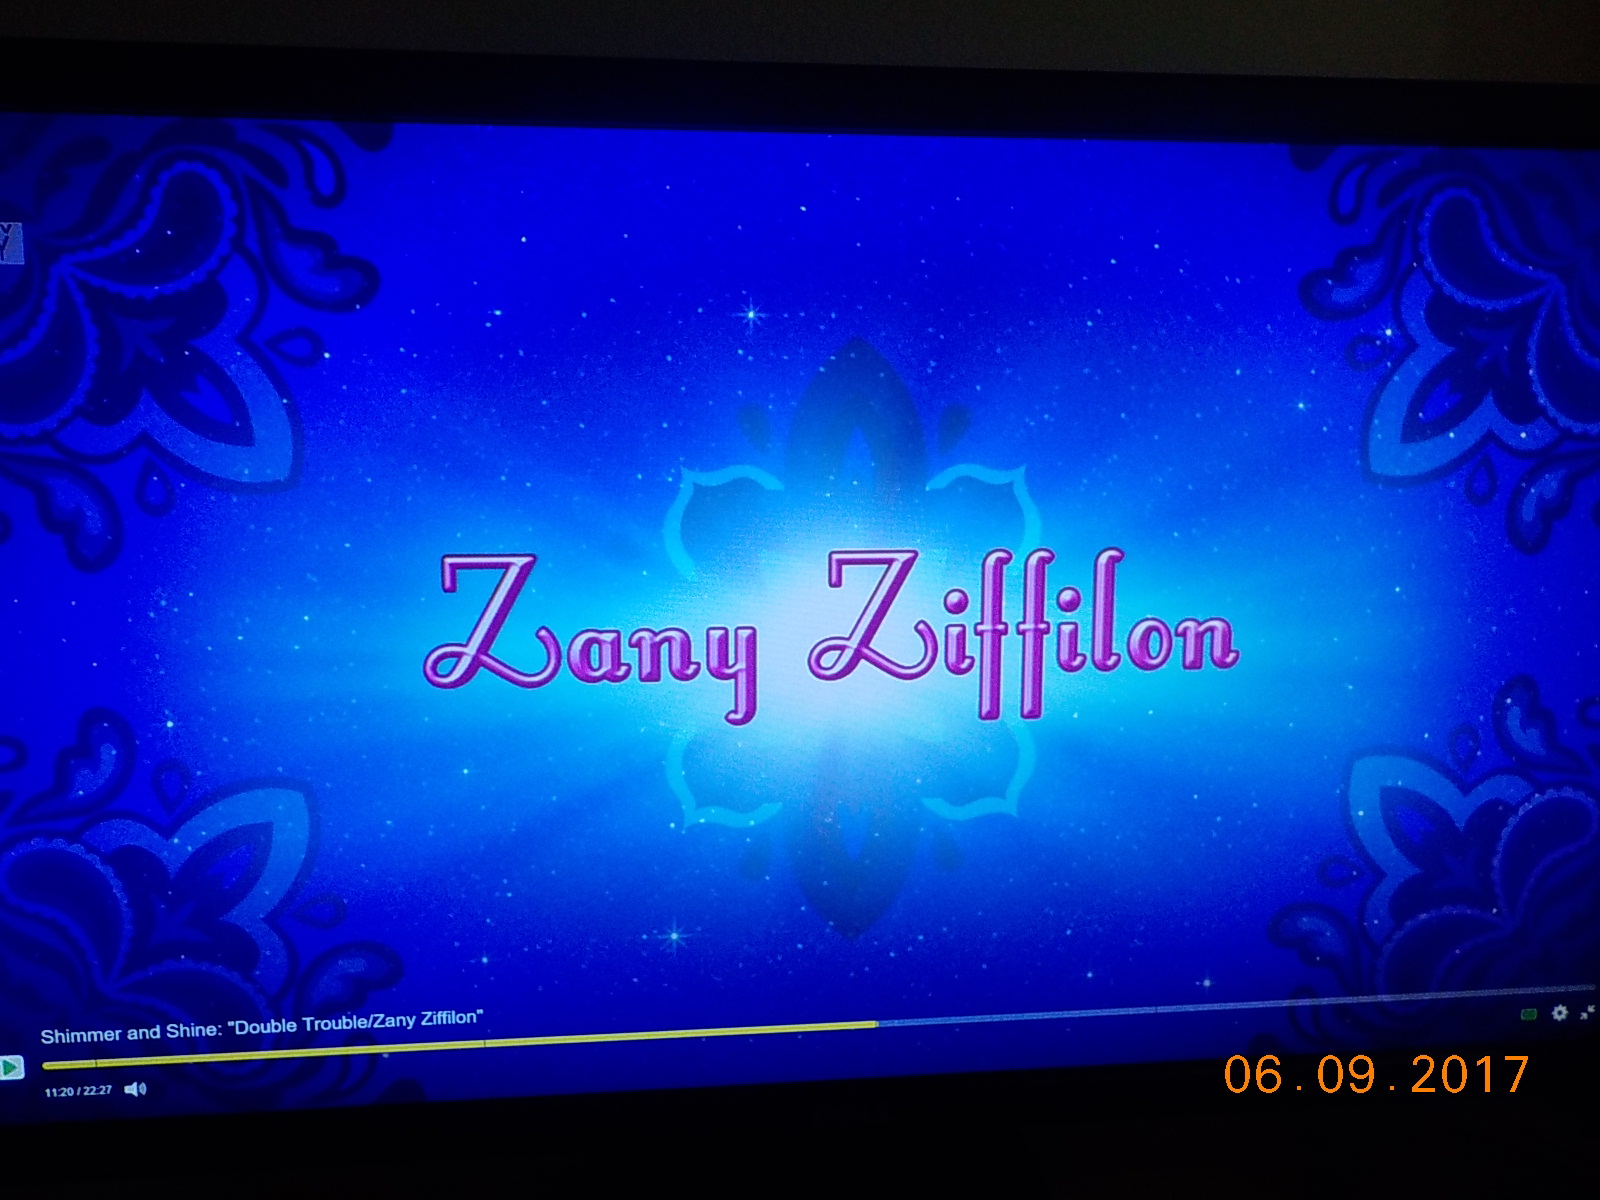 plex gives shimmer and shine episodes incorrect names